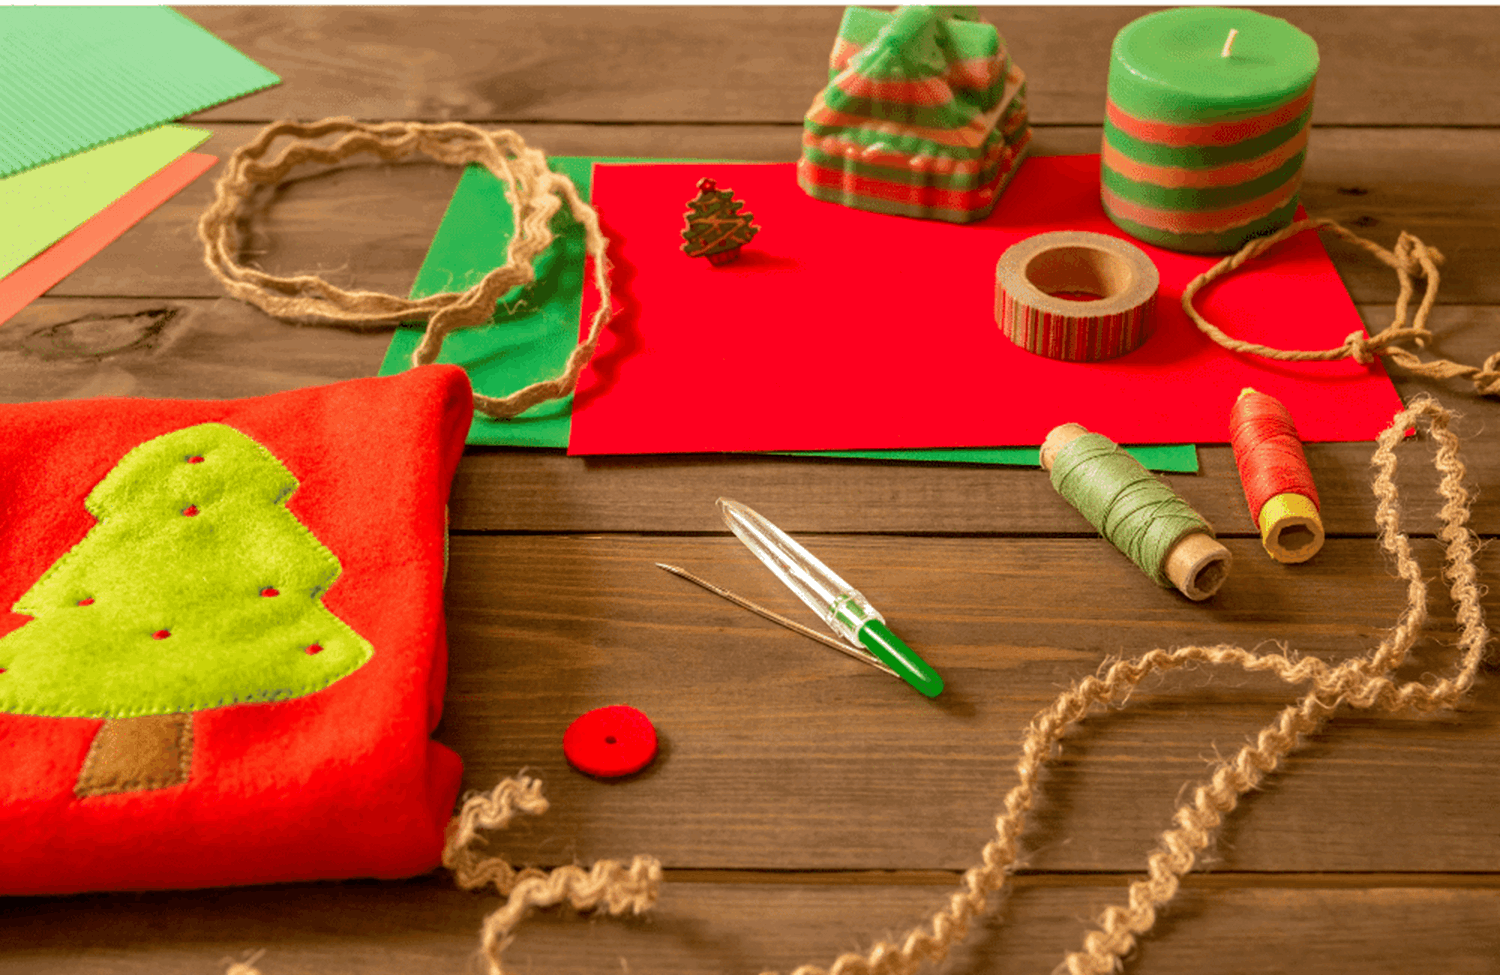 Table with Christmas Crafts